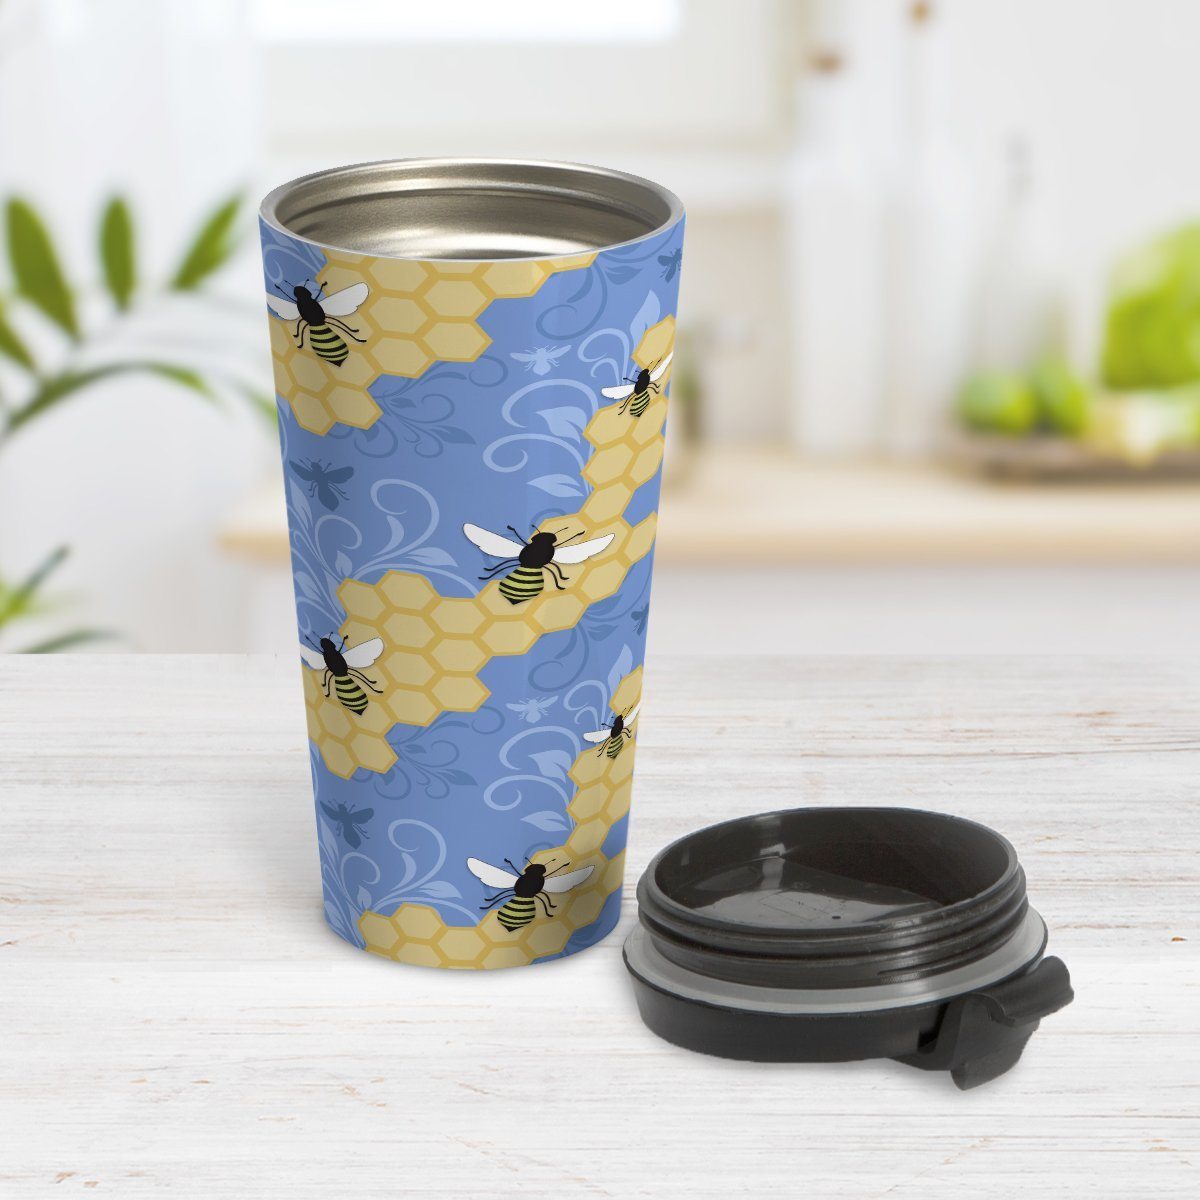 Blue Honeycomb Bee Travel Mug at Amy's Coffee Mugs. A travel mug designed with a pattern of black and yellow bees on honeycomb lines over a blue flourish background that wraps around the tapered shaped mug.